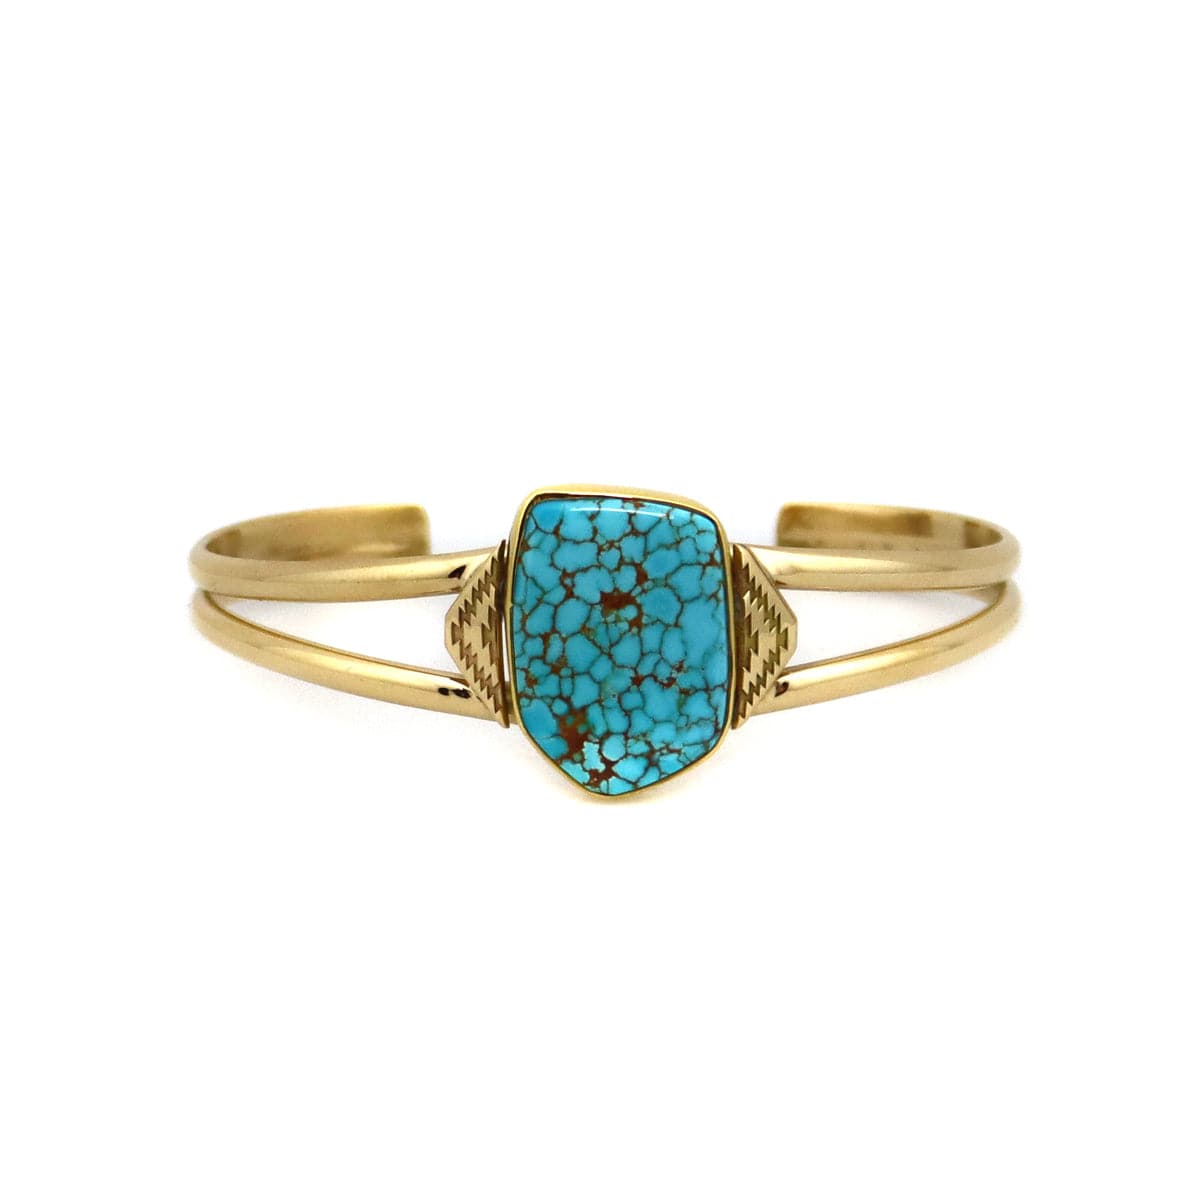 Mark Sublette Collection - Featuring Sam Patania #8 Turquoise and 18K Gold Bracelet, size 6.75 (J13332)
